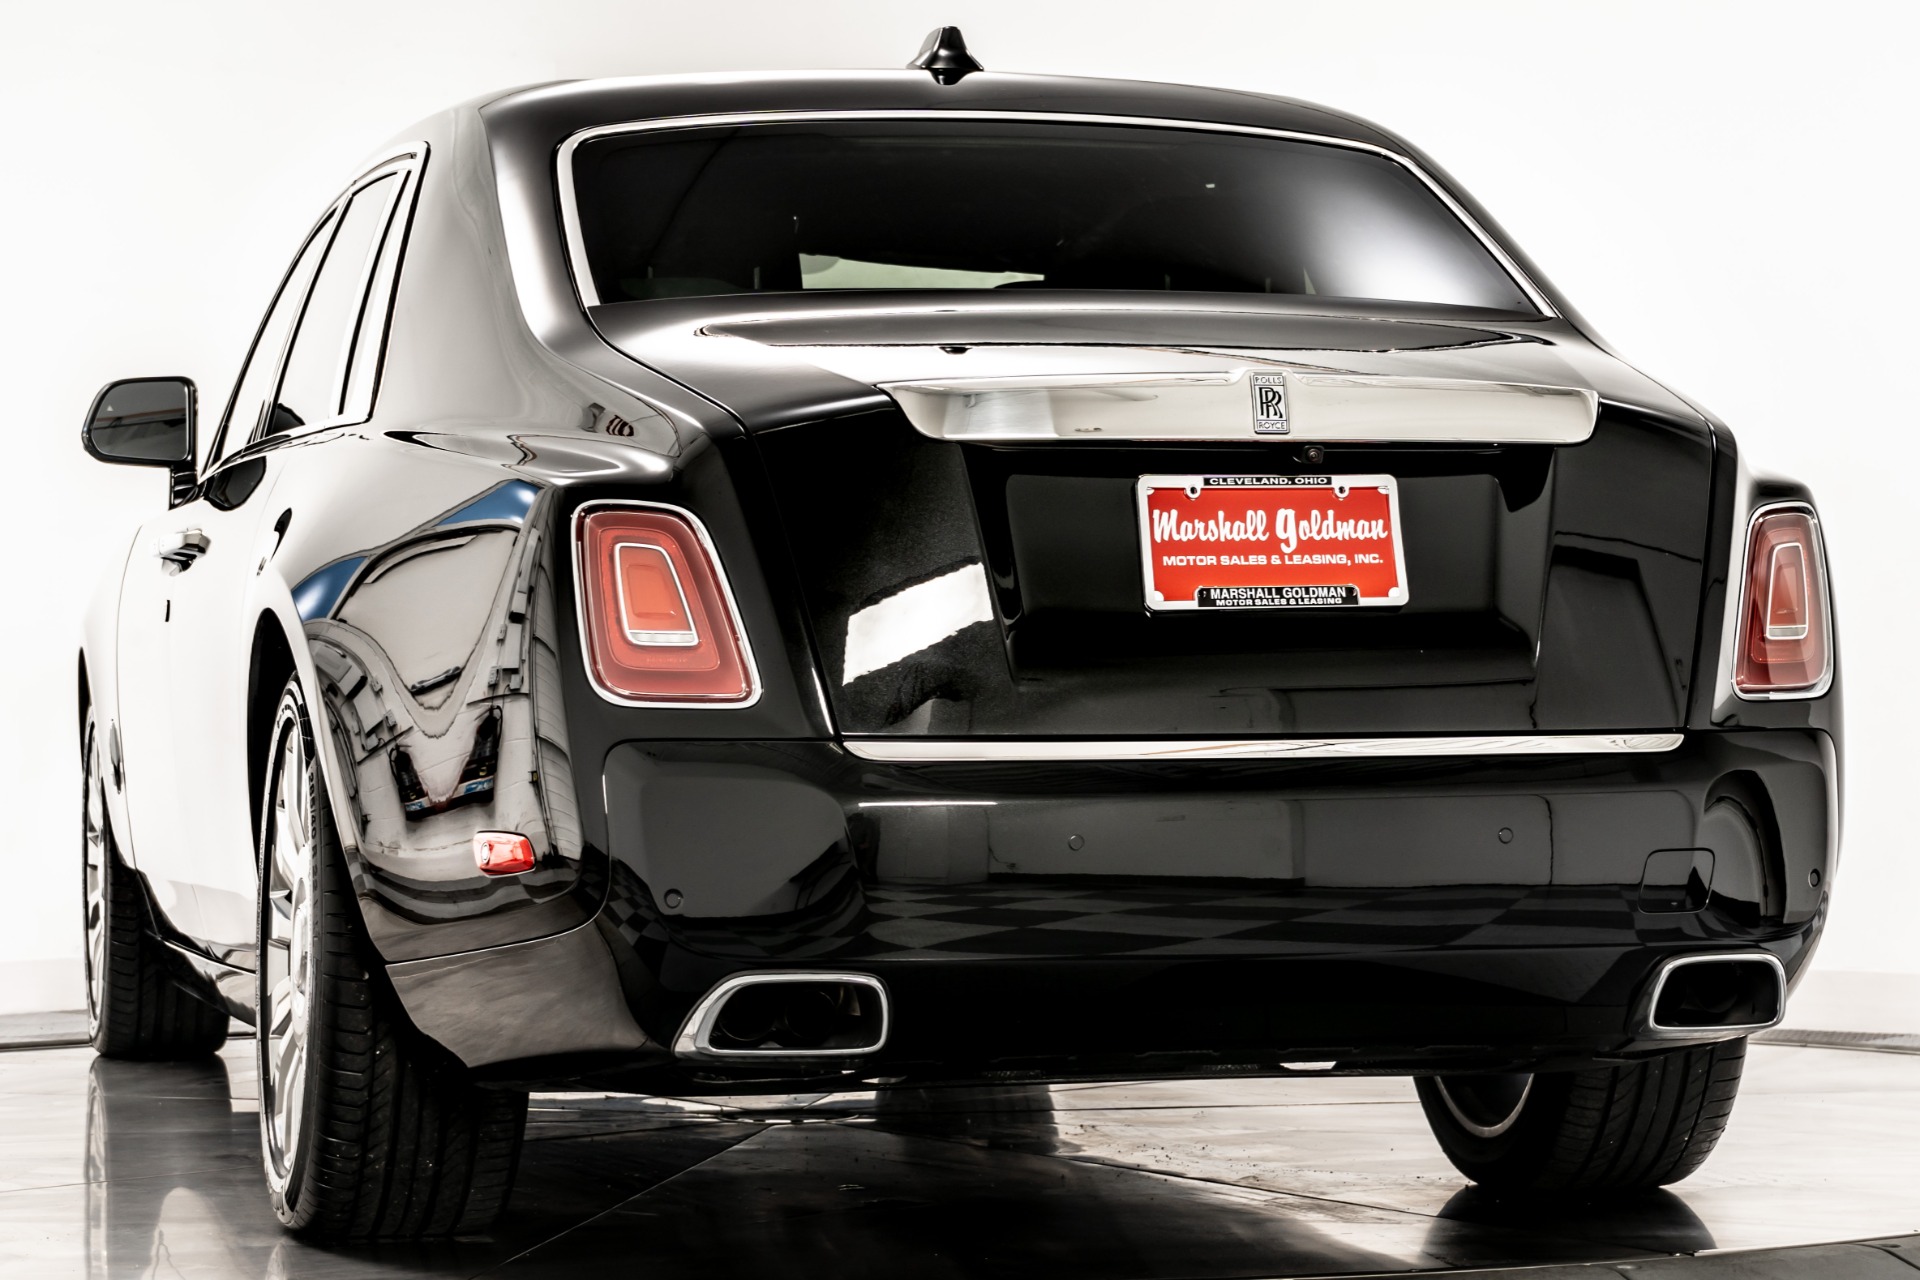 Used 2022 RollsRoyce Ghost For Sale Sold  Marshall Goldman Cleveland  Stock W24481